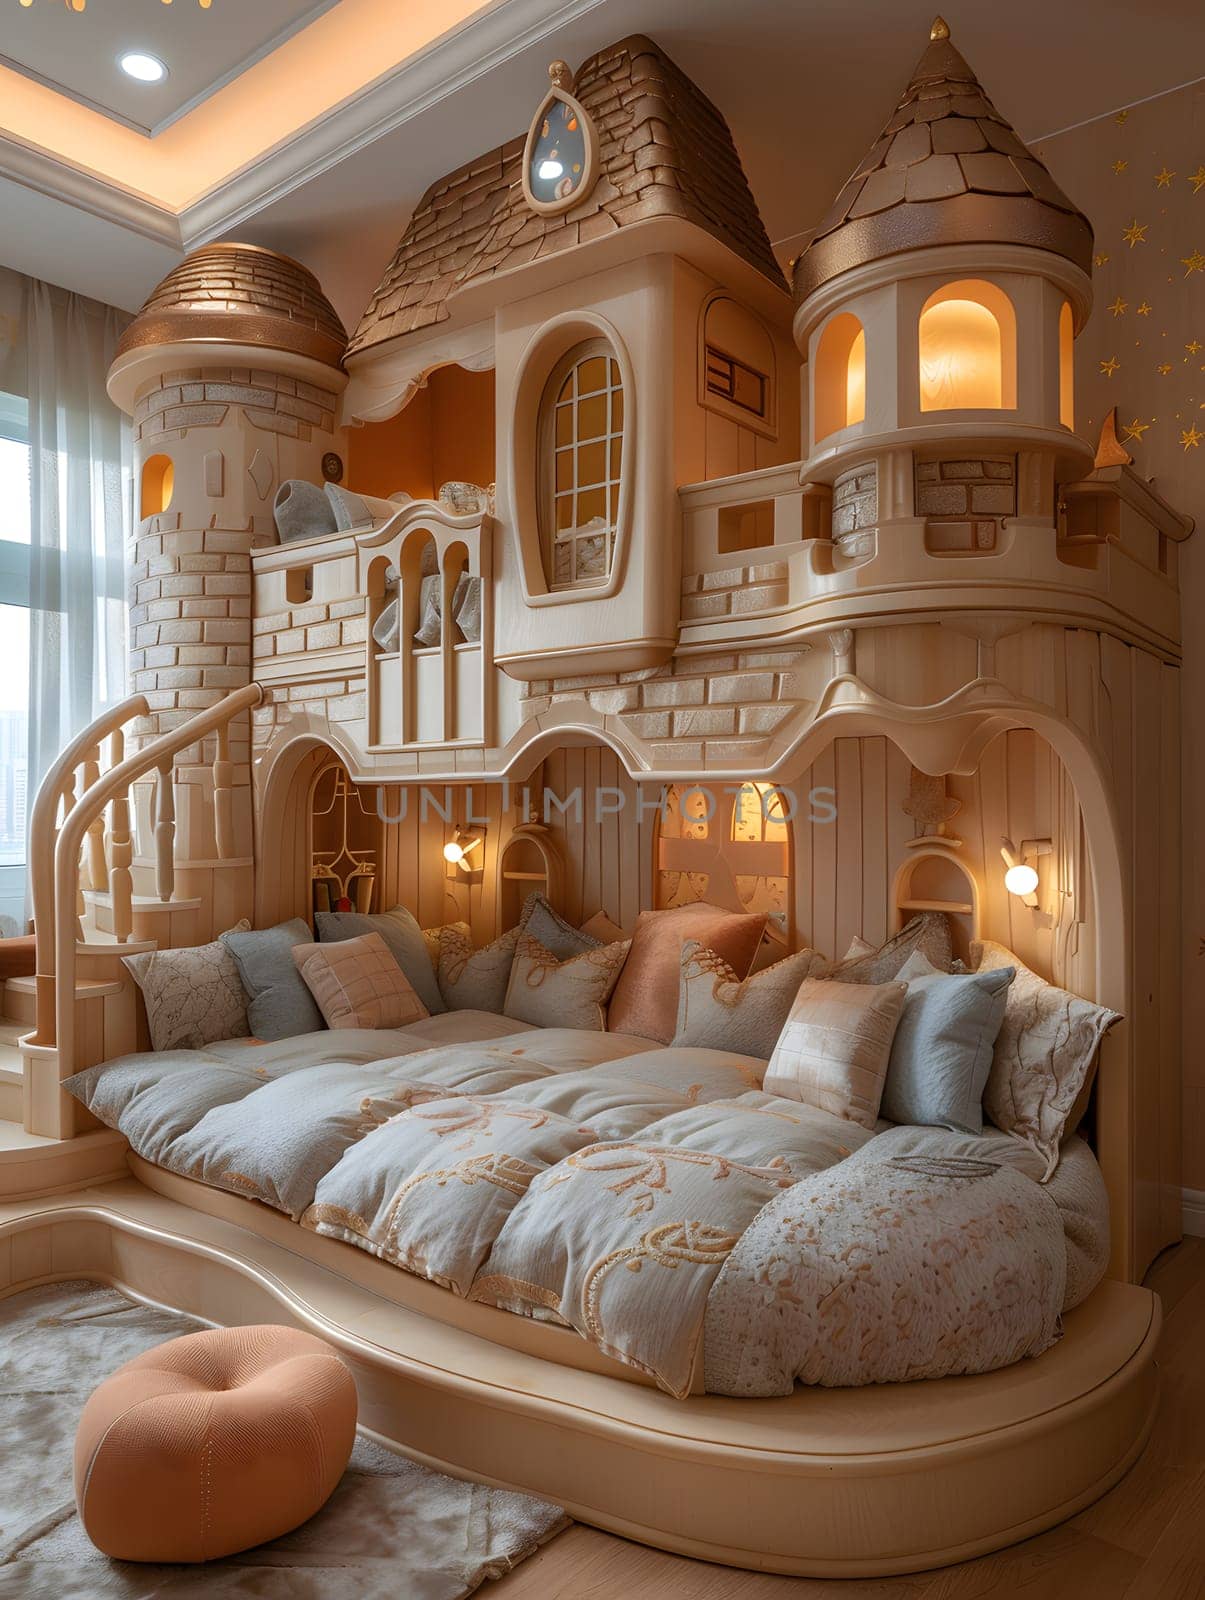 Property with castlelike bunk bed, a unique interior design feature by Nadtochiy